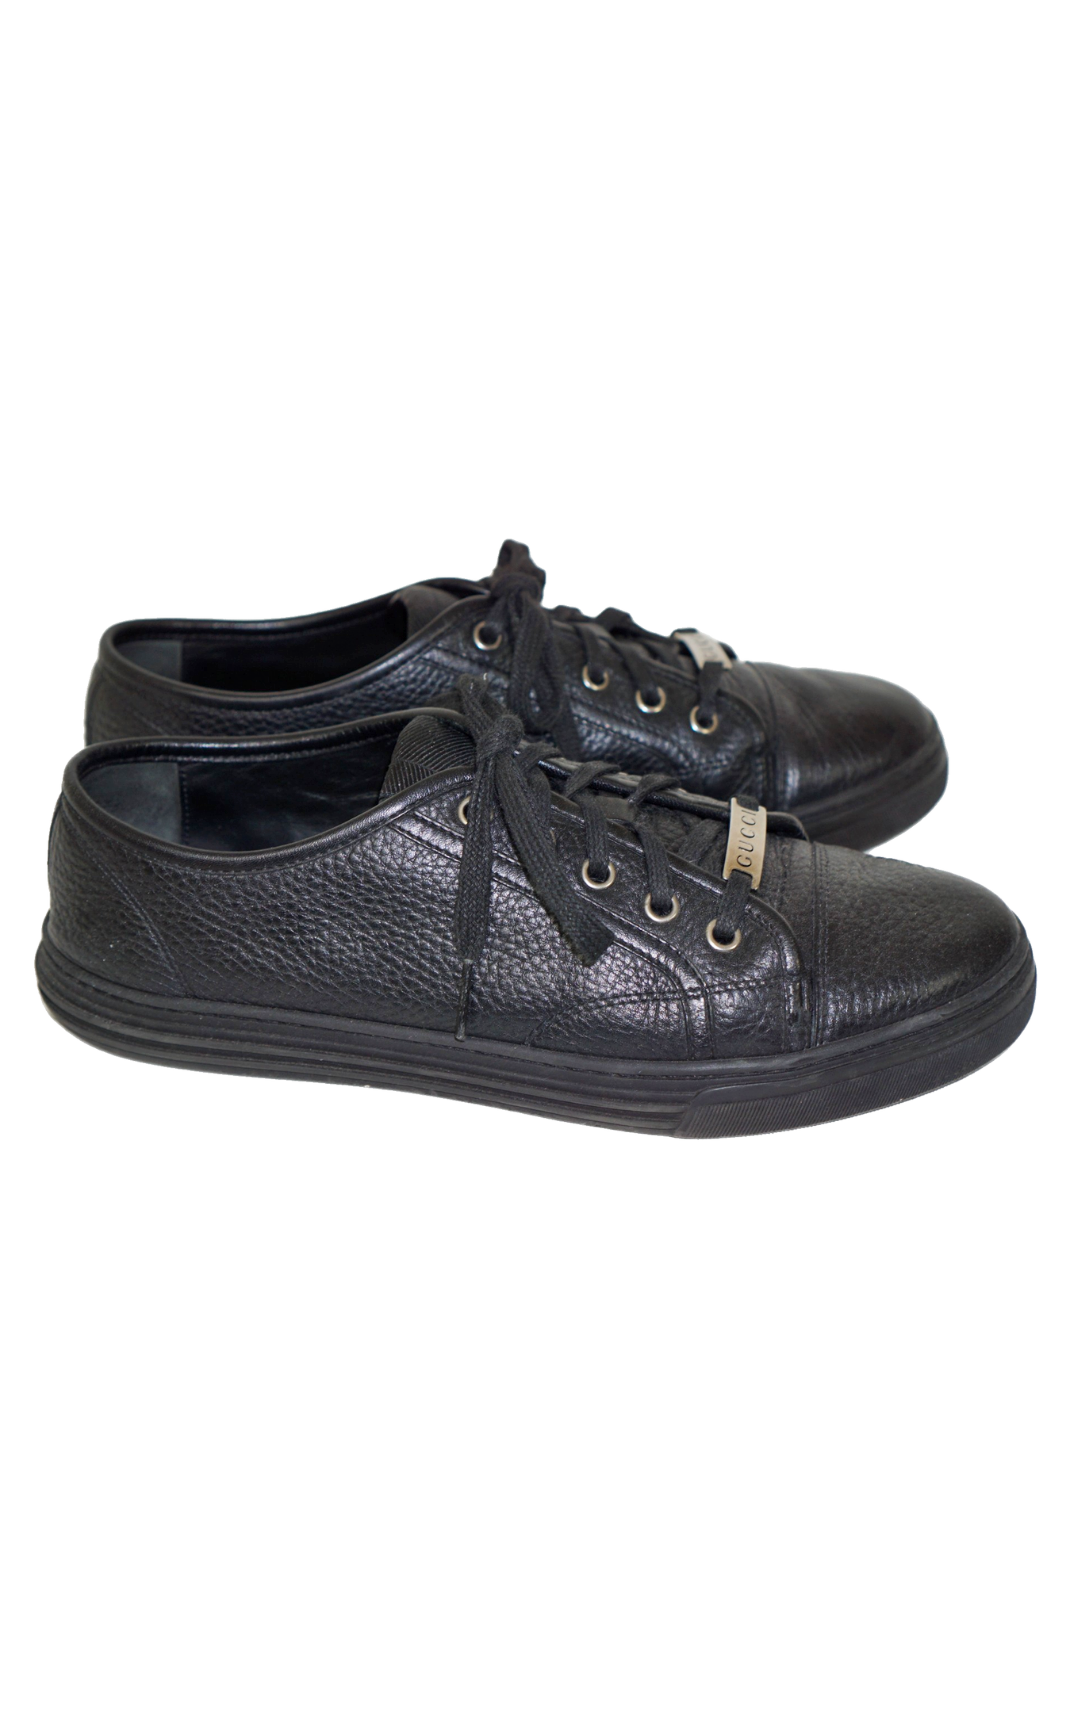 GUCCI Logo Black Leather Low Top Lace Up Sneakers resellum